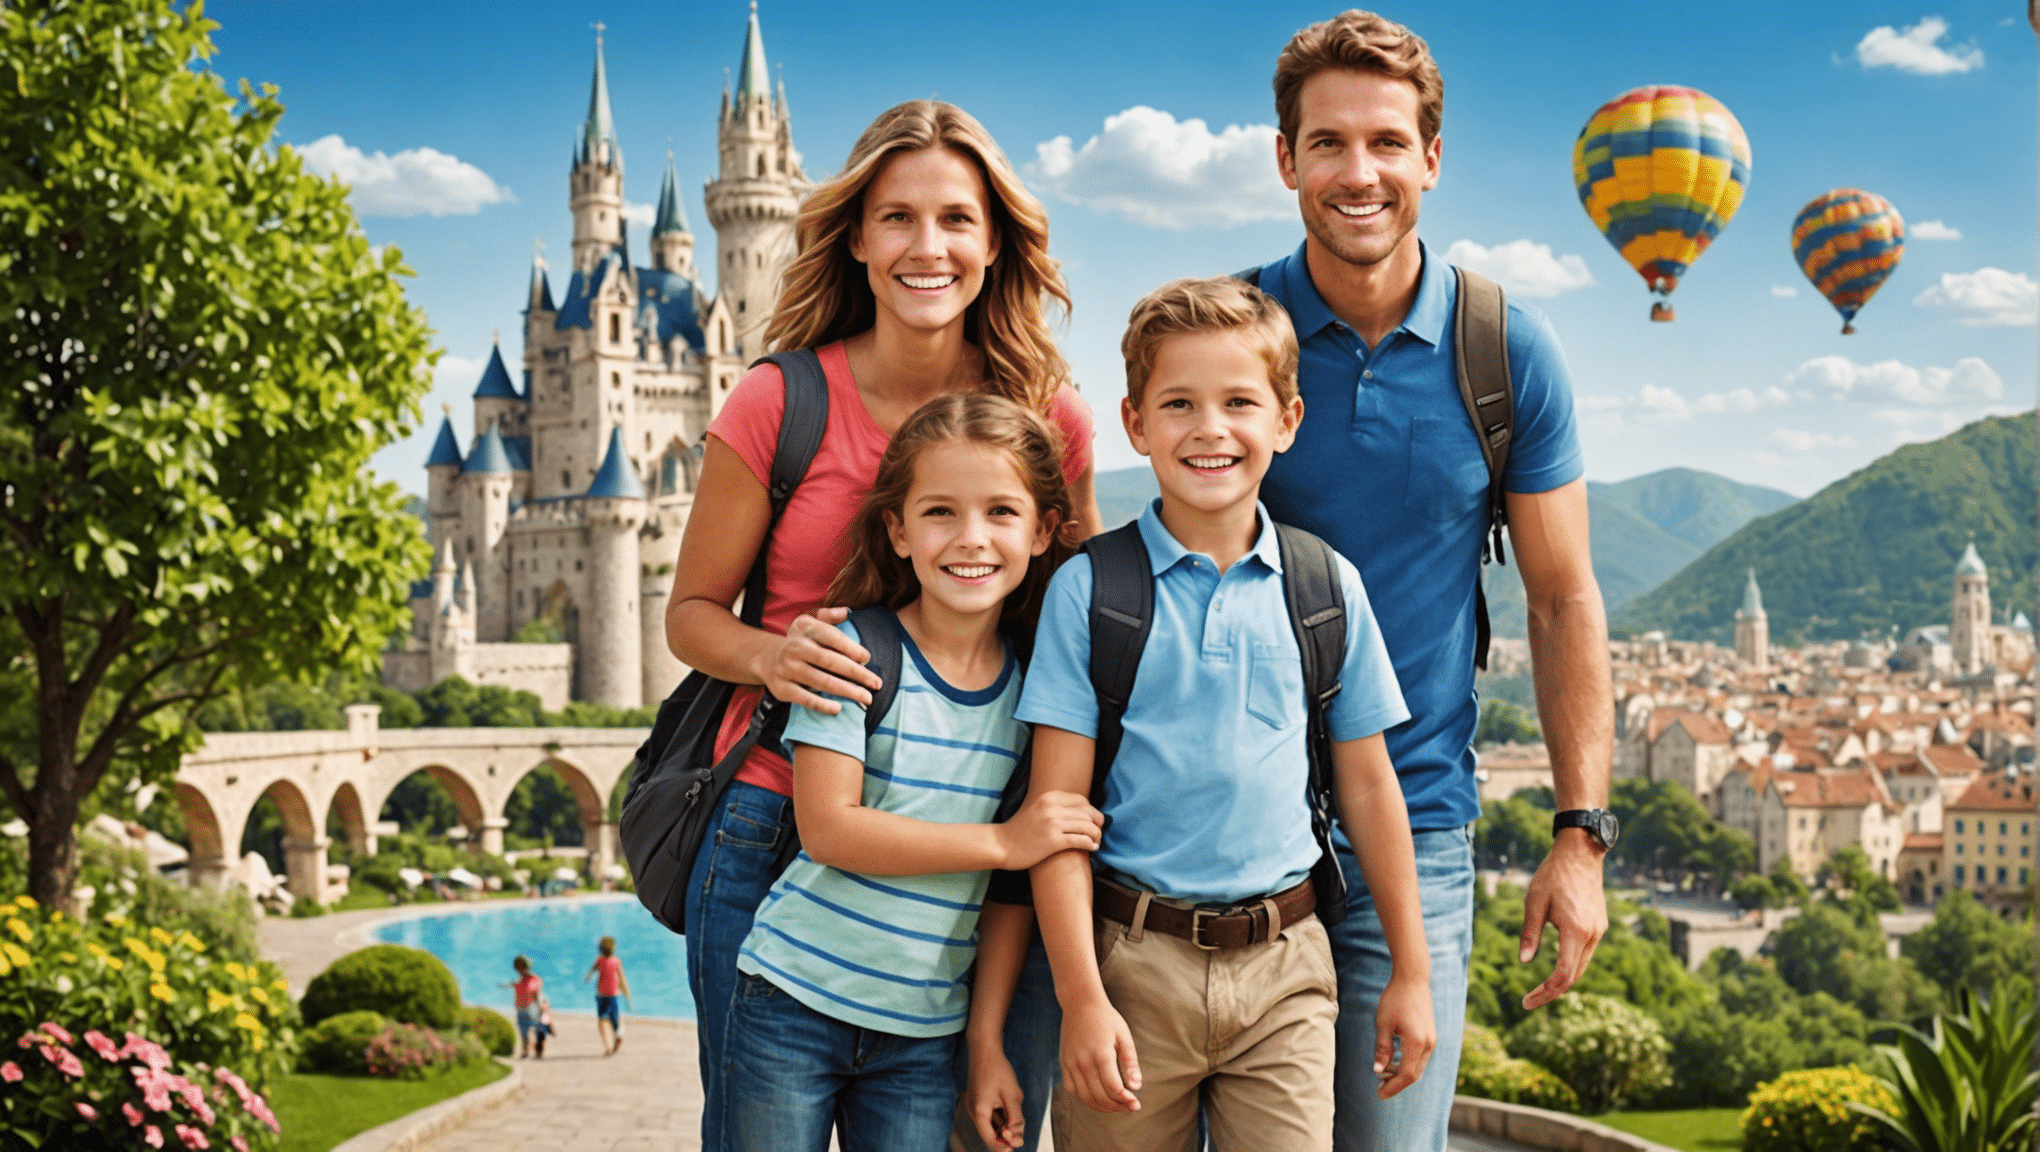 discover the ideal destinations for a family trip with children and plan unforgettable moments with your family.